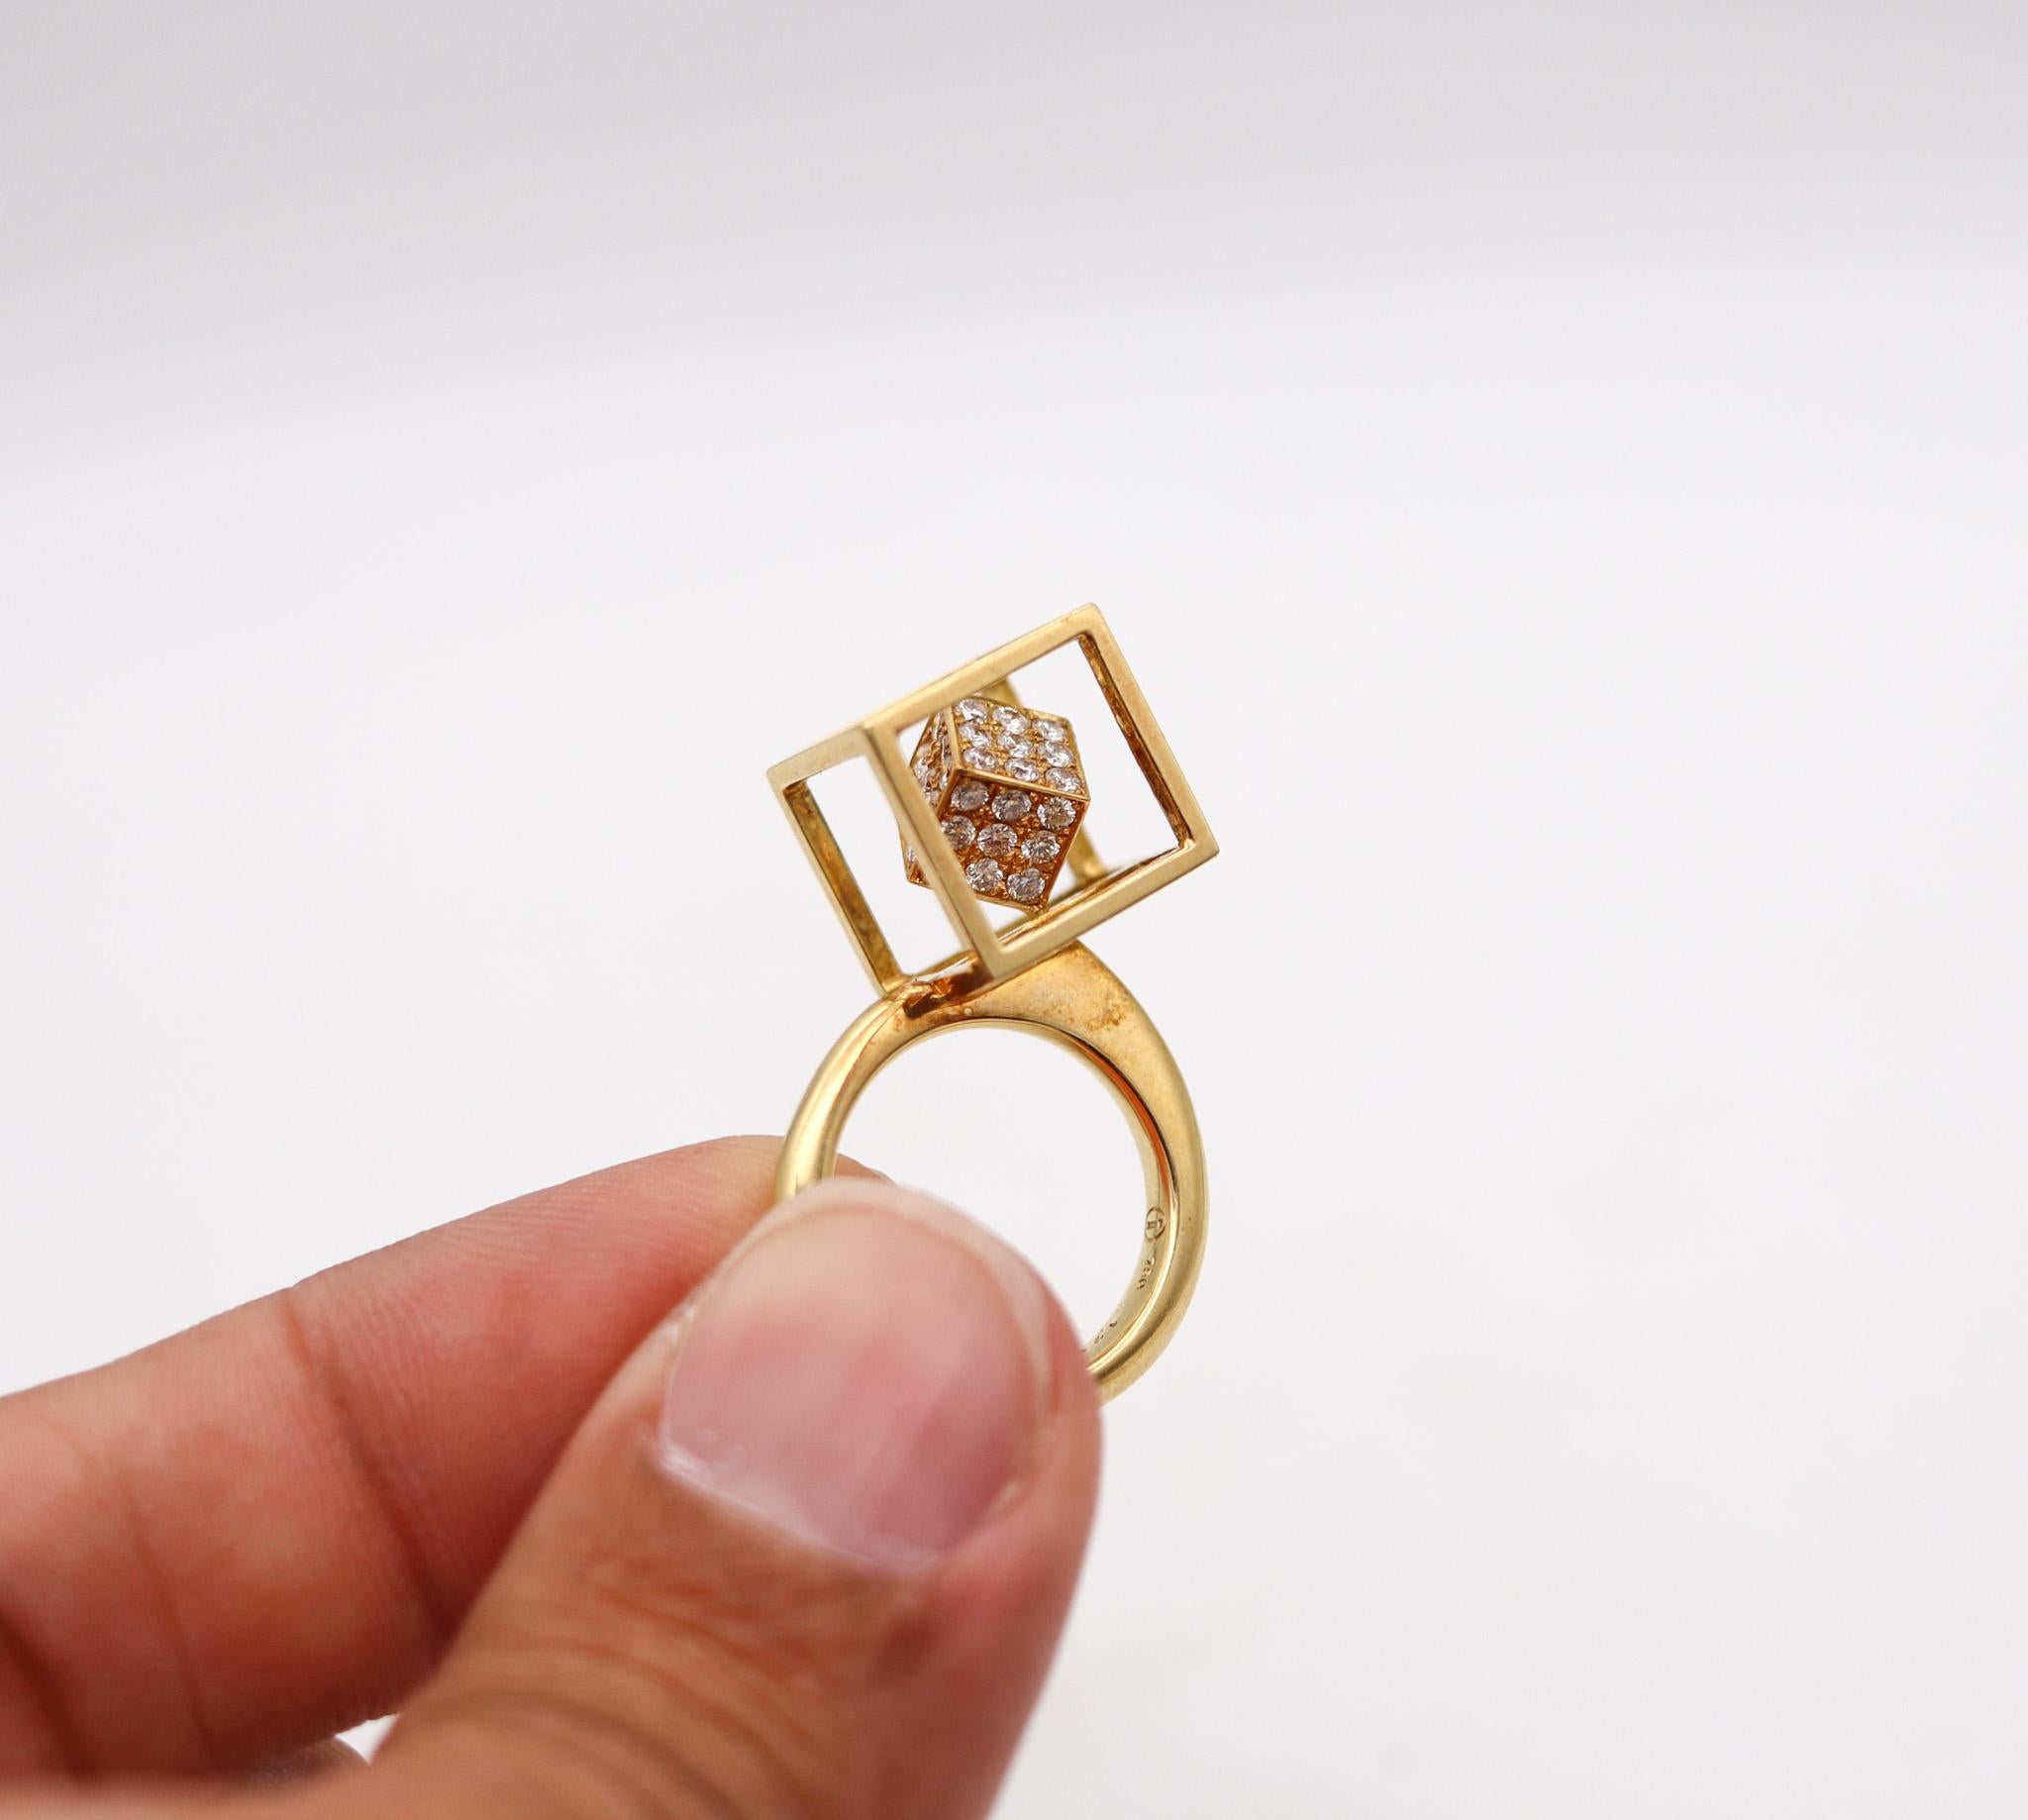 Modernist Sculptural Op Art Ring In 18Kt Yellow Gold With 1.20 Ctw In Diamonds For Sale 1